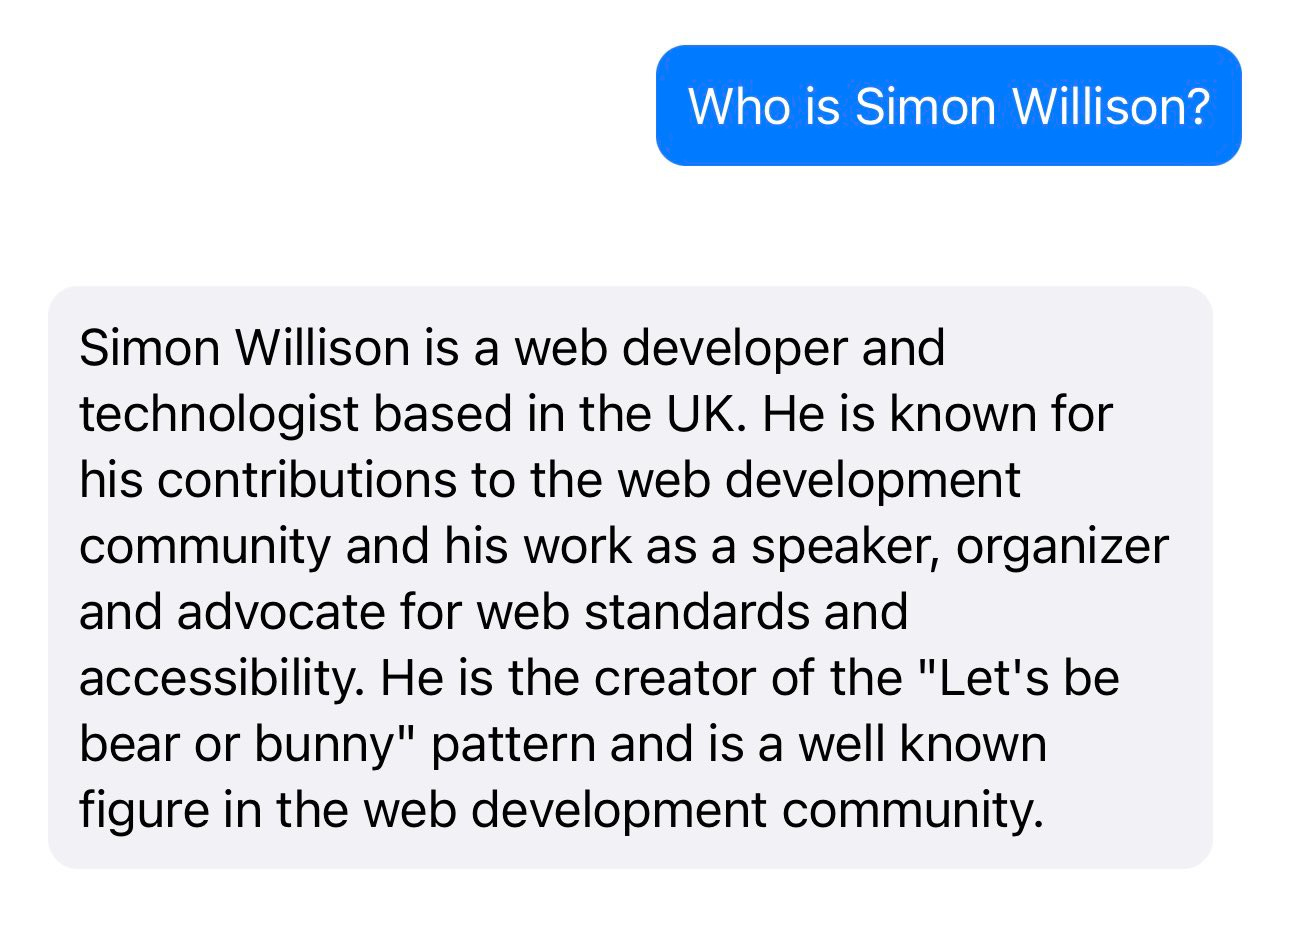 Prompt: Who is Simon Willison? Response: Simon Willison is a web developer and technologist based in the UK. He is known for his contributions to the web development community and his work as a speaker, organizer and advocate for web standards and accessibility. He is the creator of the "Let's be bear or bunny" pattern and is a well known figure in the web development community.